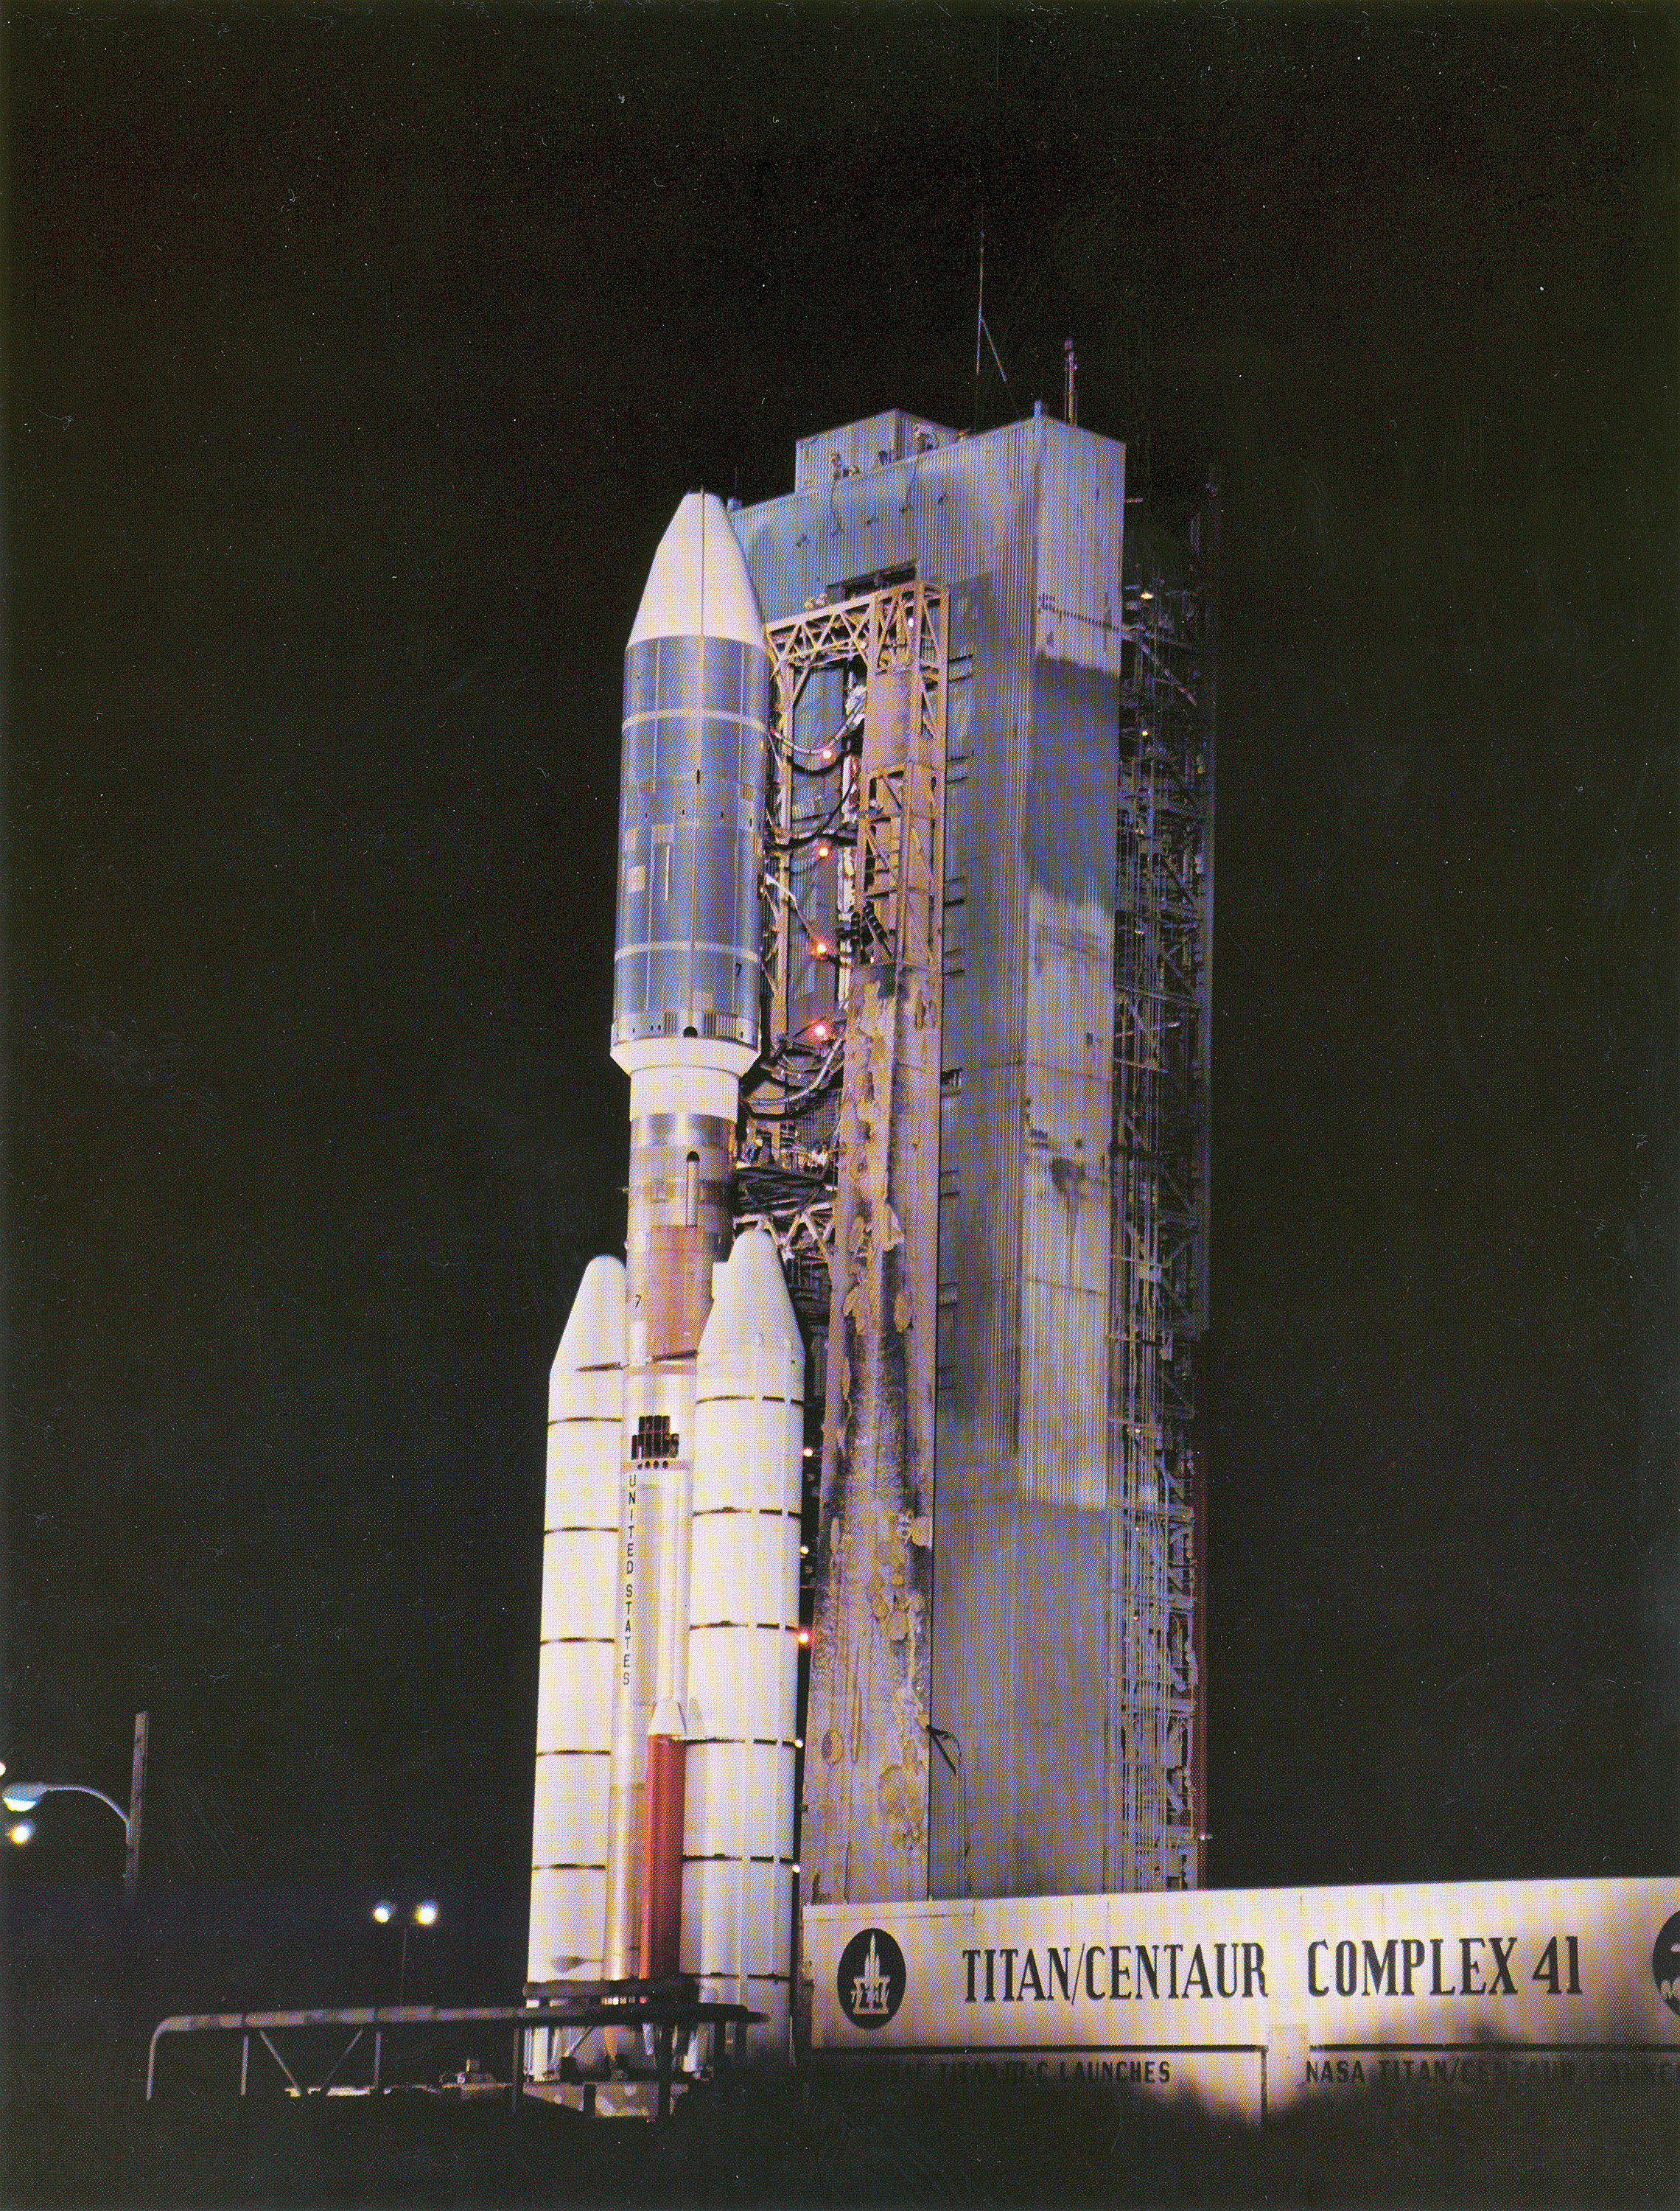 voyager launch rocket